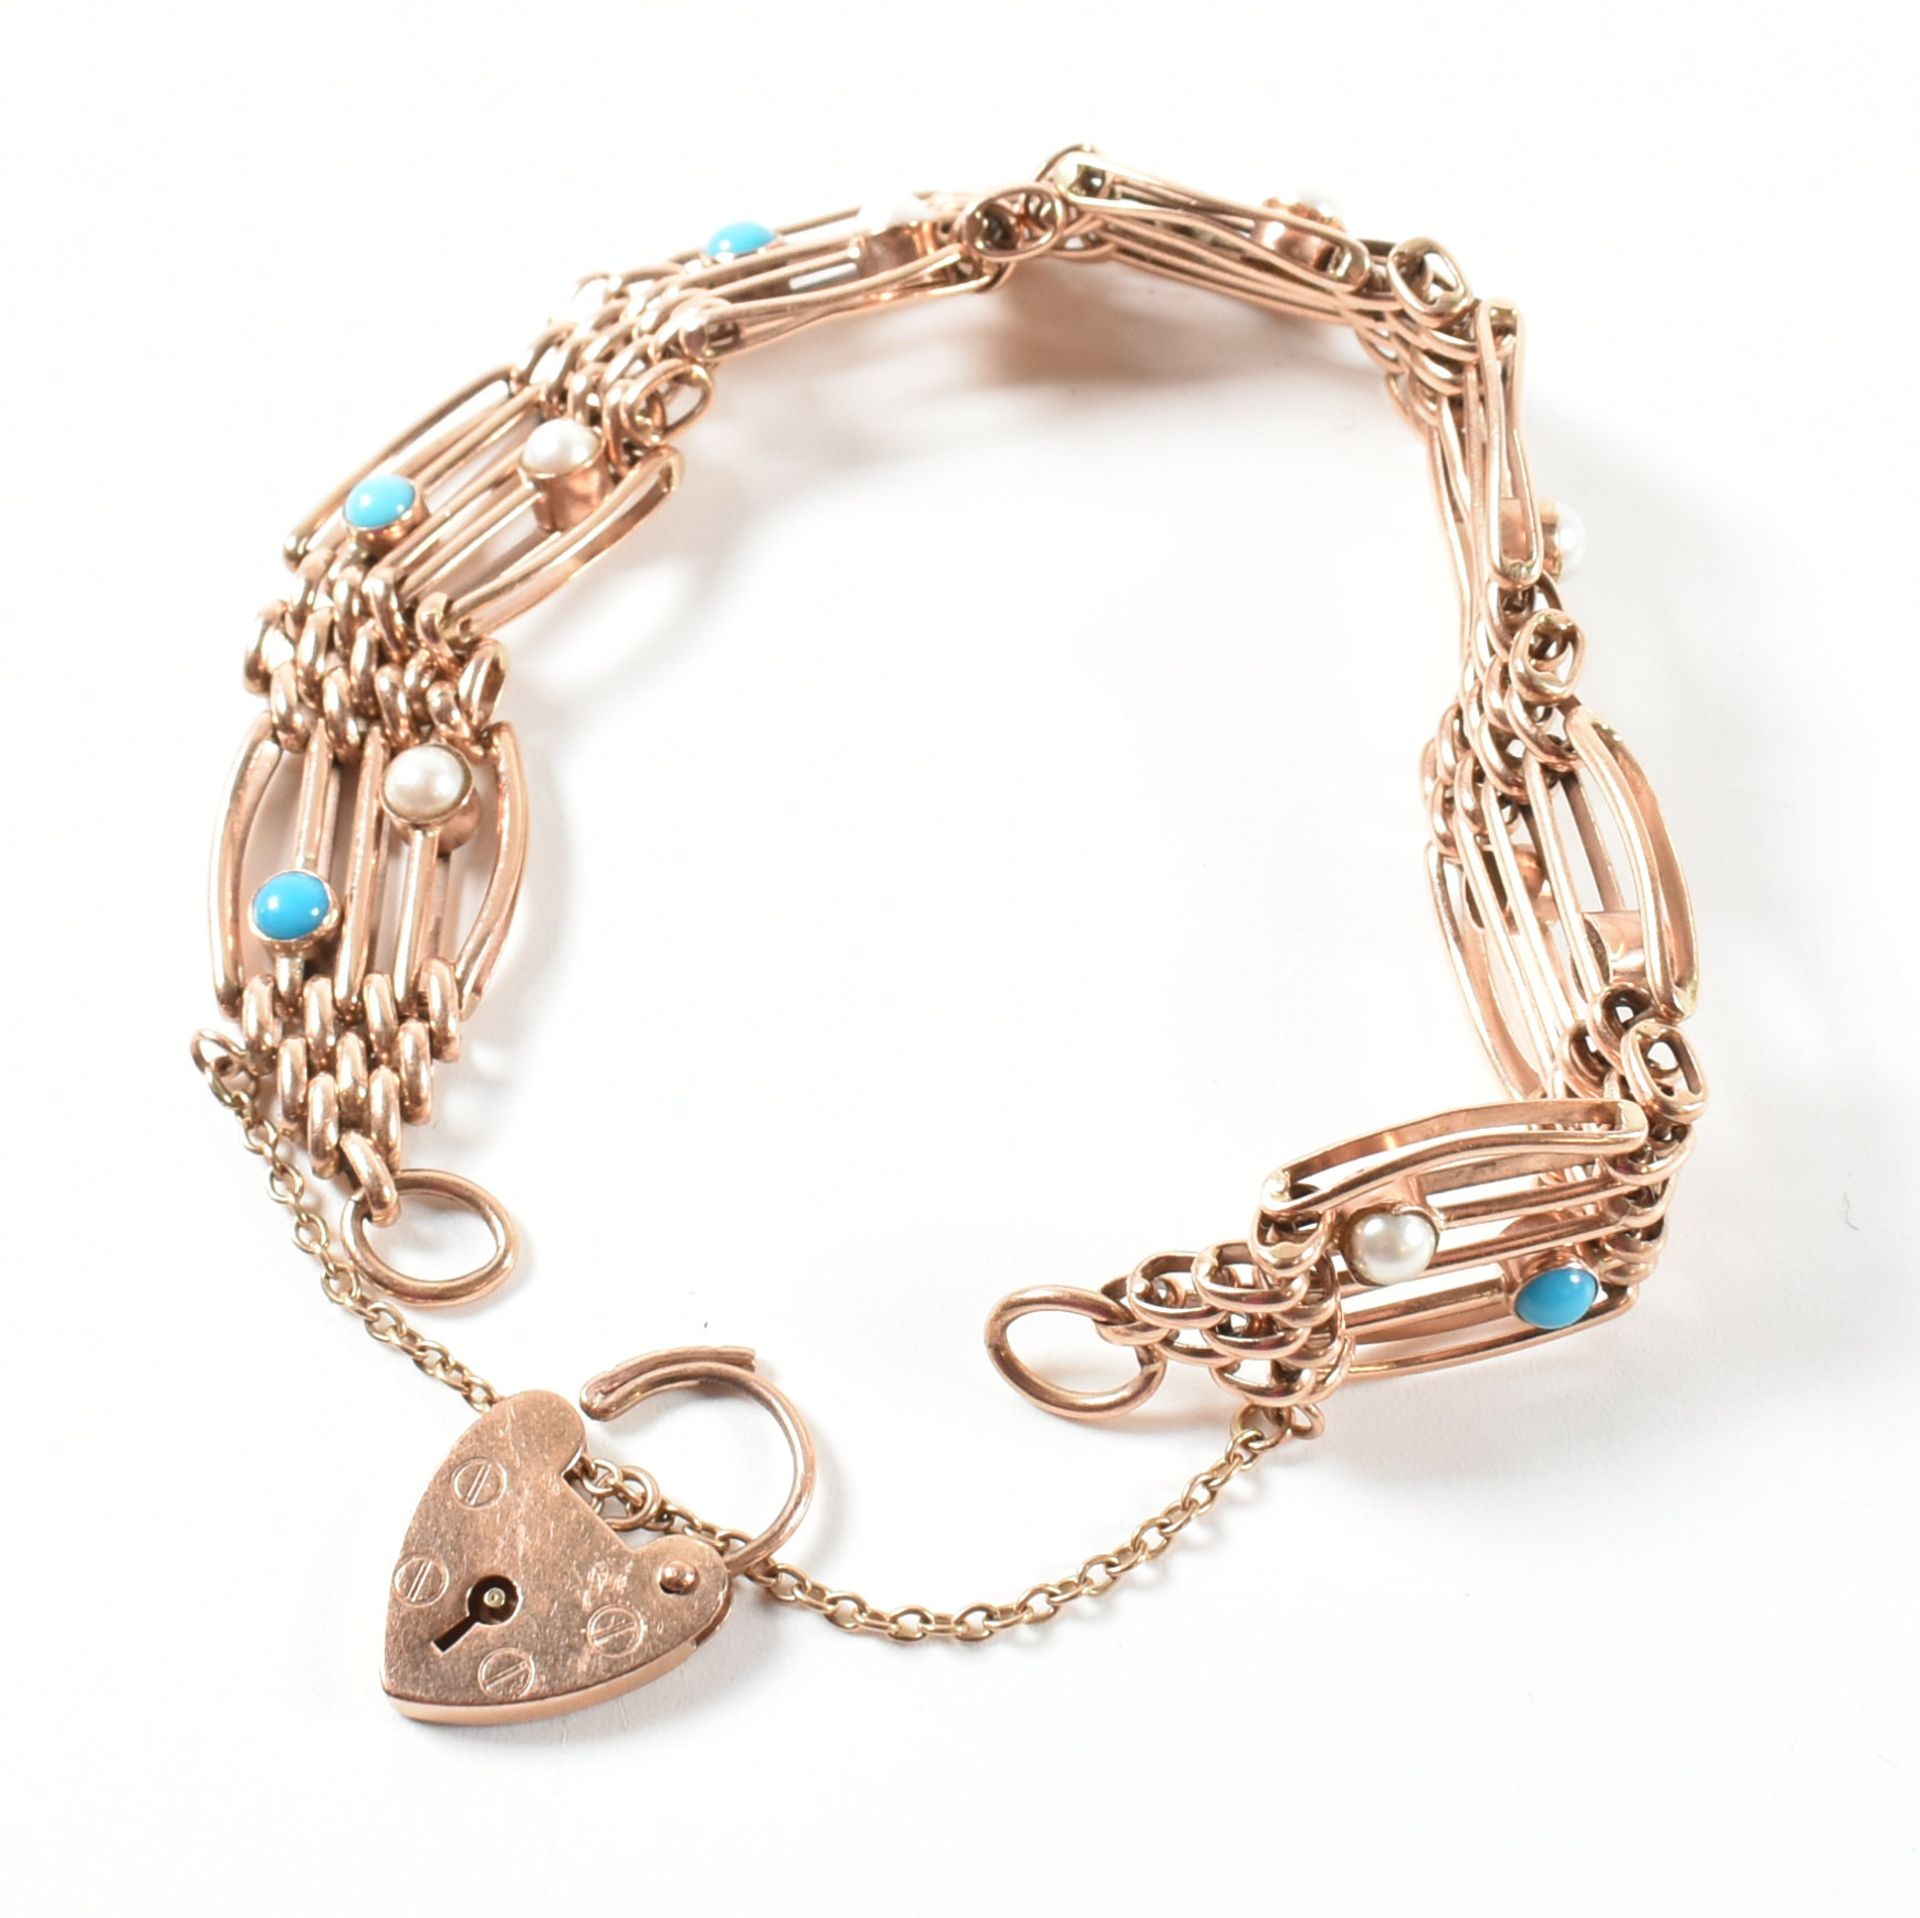 HALLMARKED 9CT ROSE GOLD PEARL & TURQUOISE GATE LINK BRACELET - Image 7 of 9